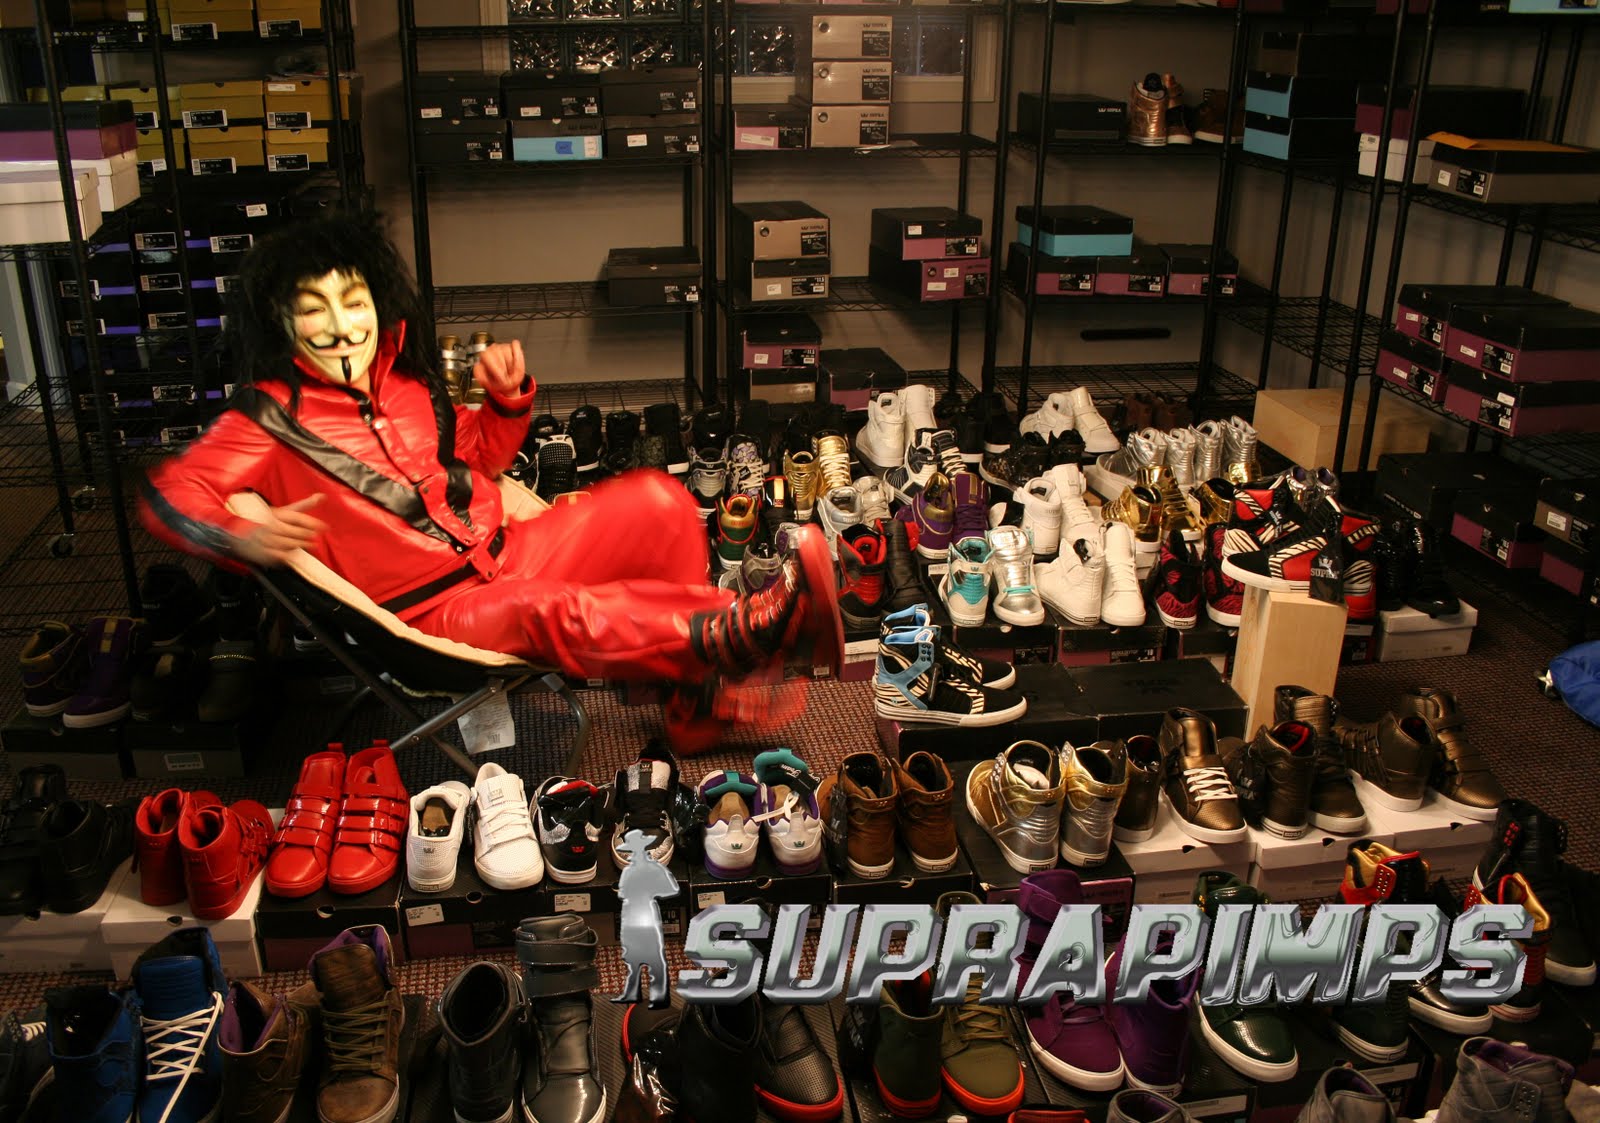 THIS IS THE SUPRAFOOTWEAR.ORG FORUM BLOG